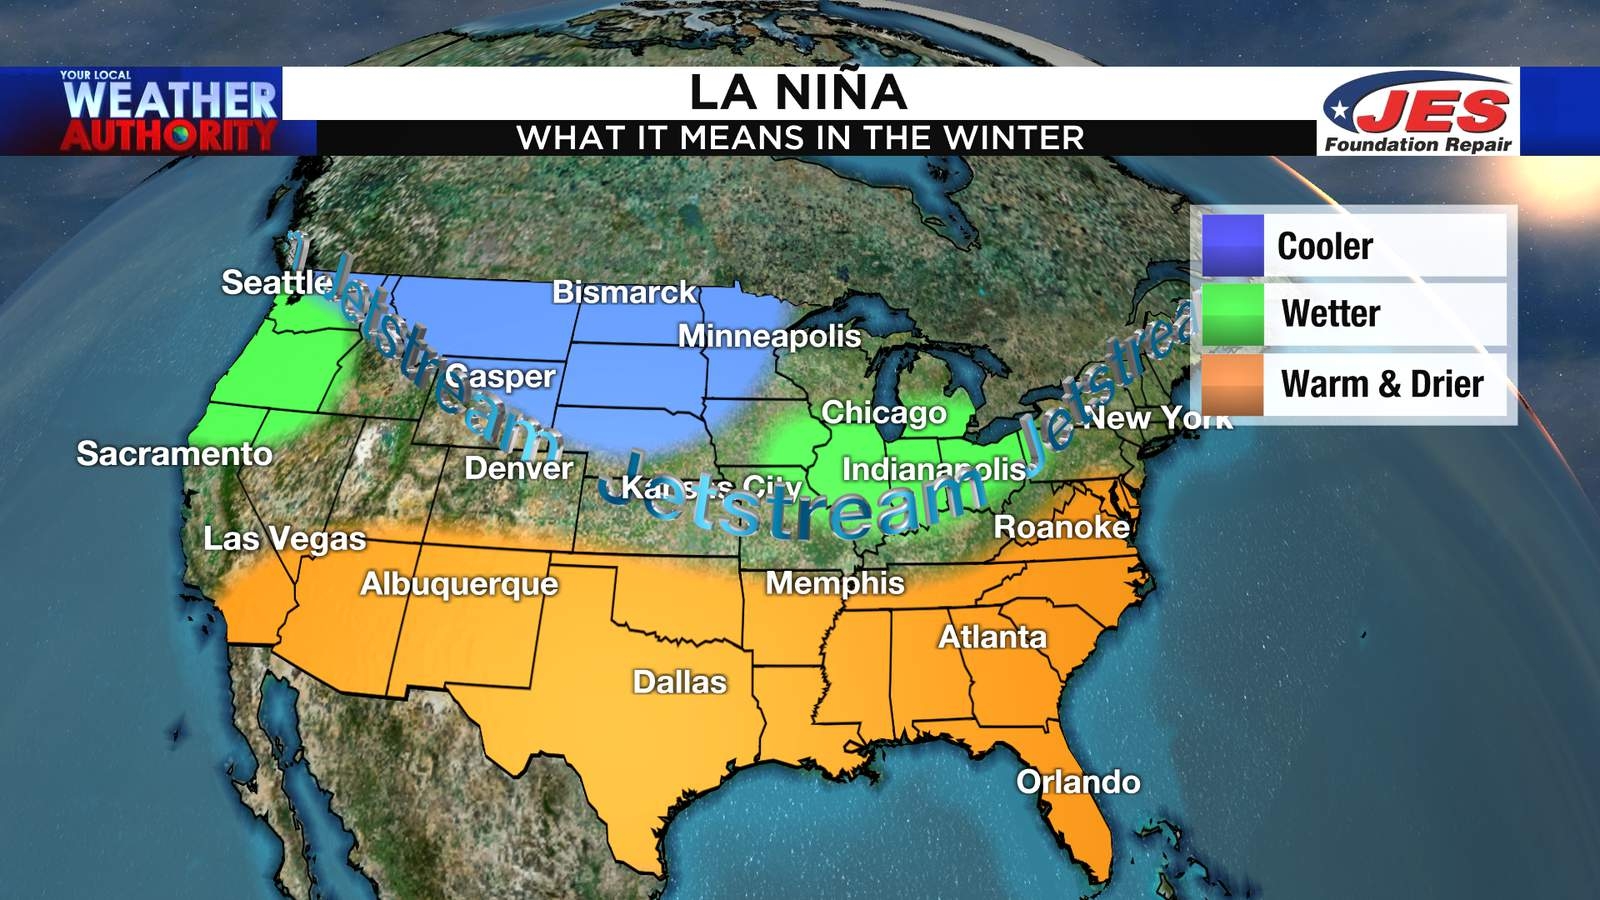 U.S Winter Weather Forcast 2021: Cooler North, warmer South, La Nina and Drought